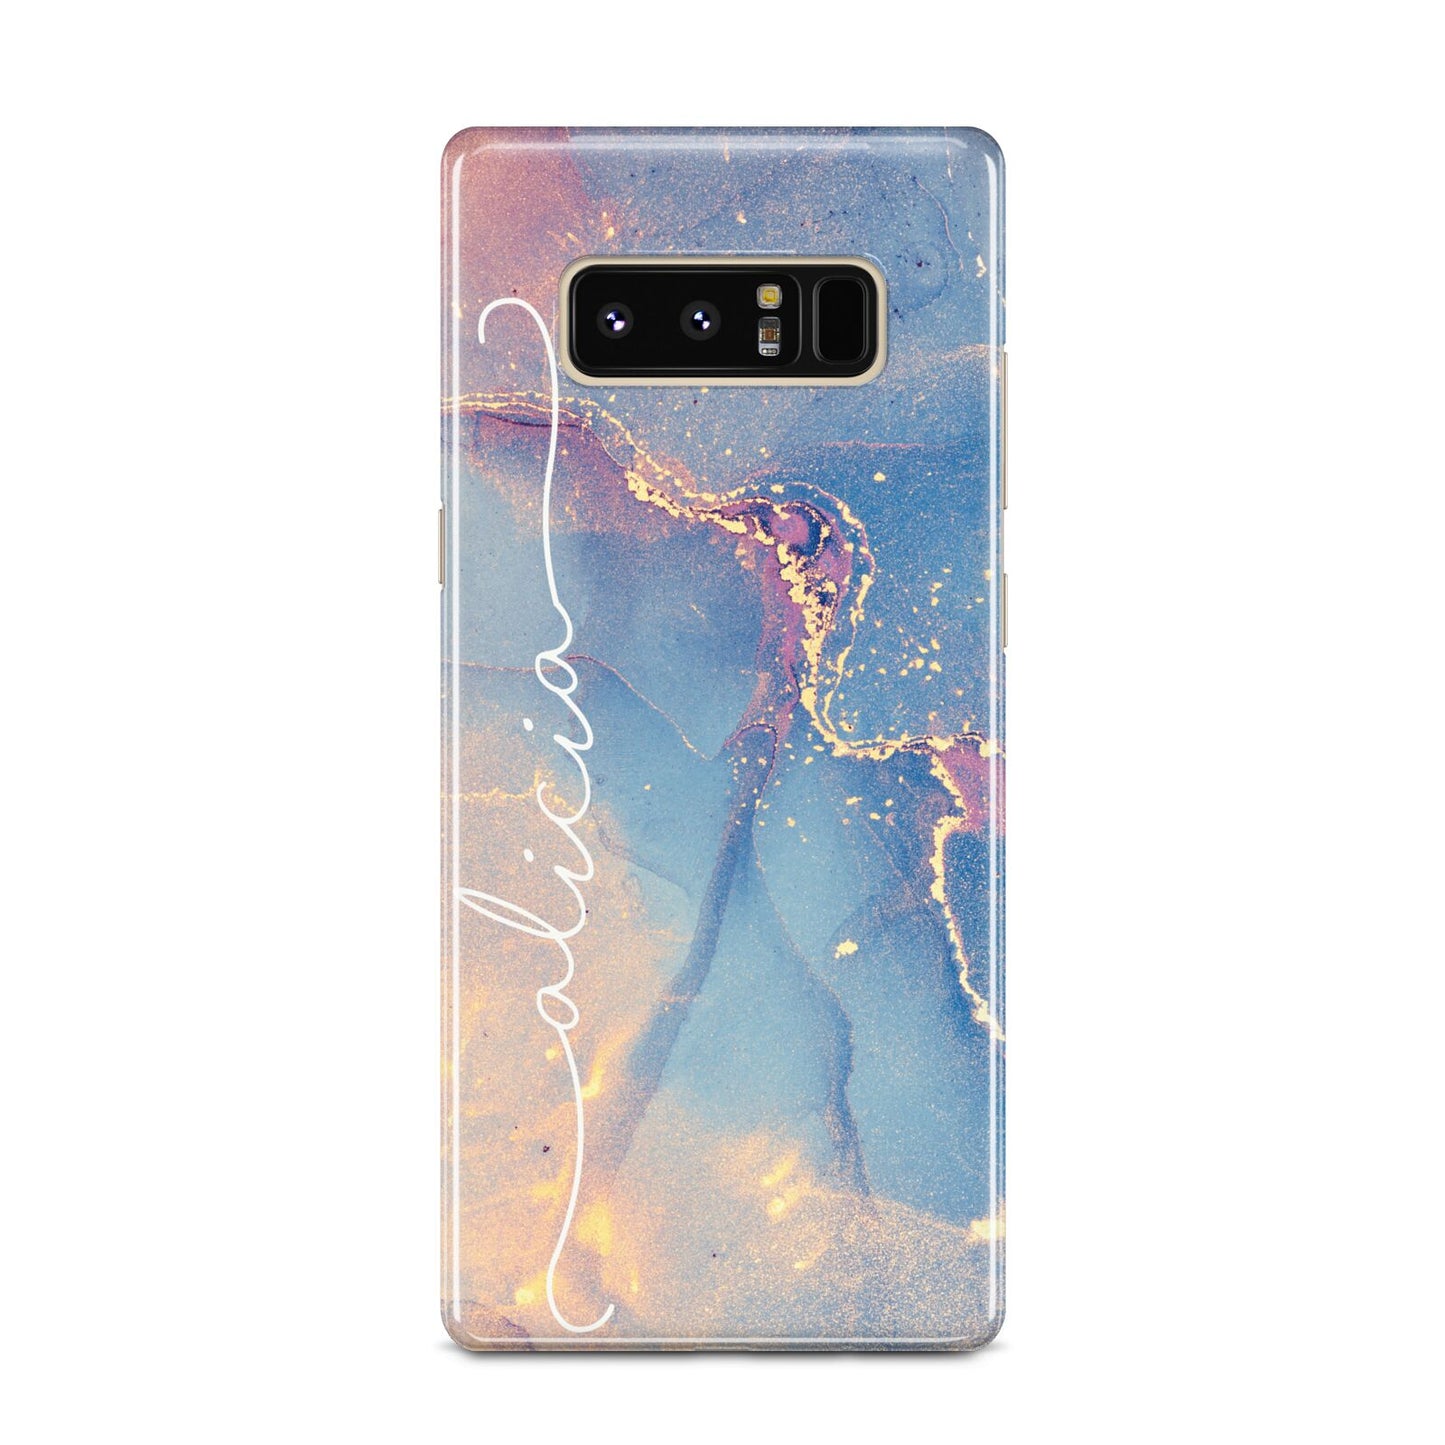 Blue and Pink Marble Samsung Galaxy Note 8 Case